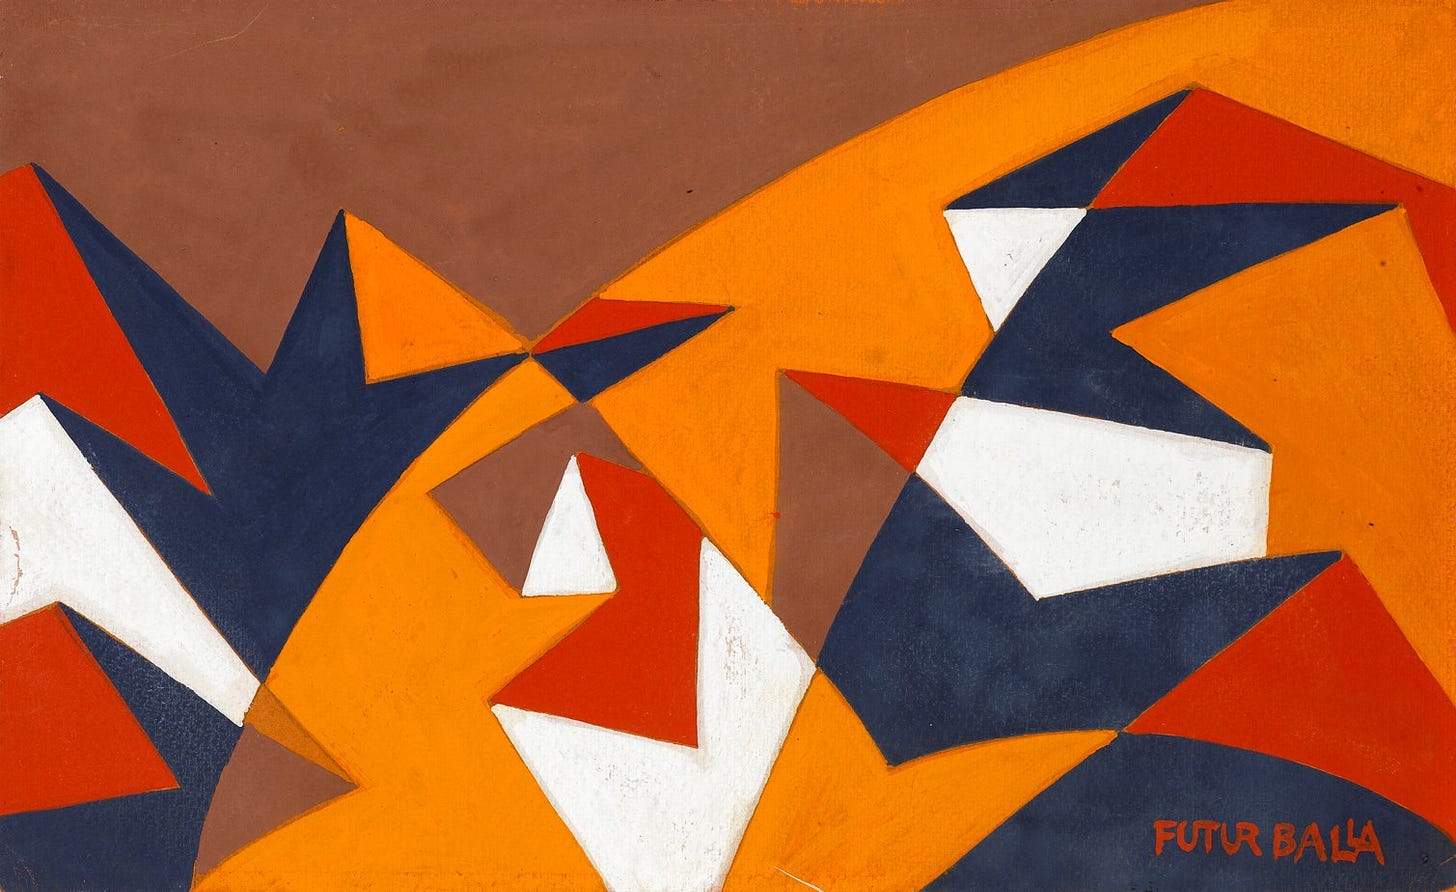 An expressionist painting with lines of orange, brown, red, white, and blue